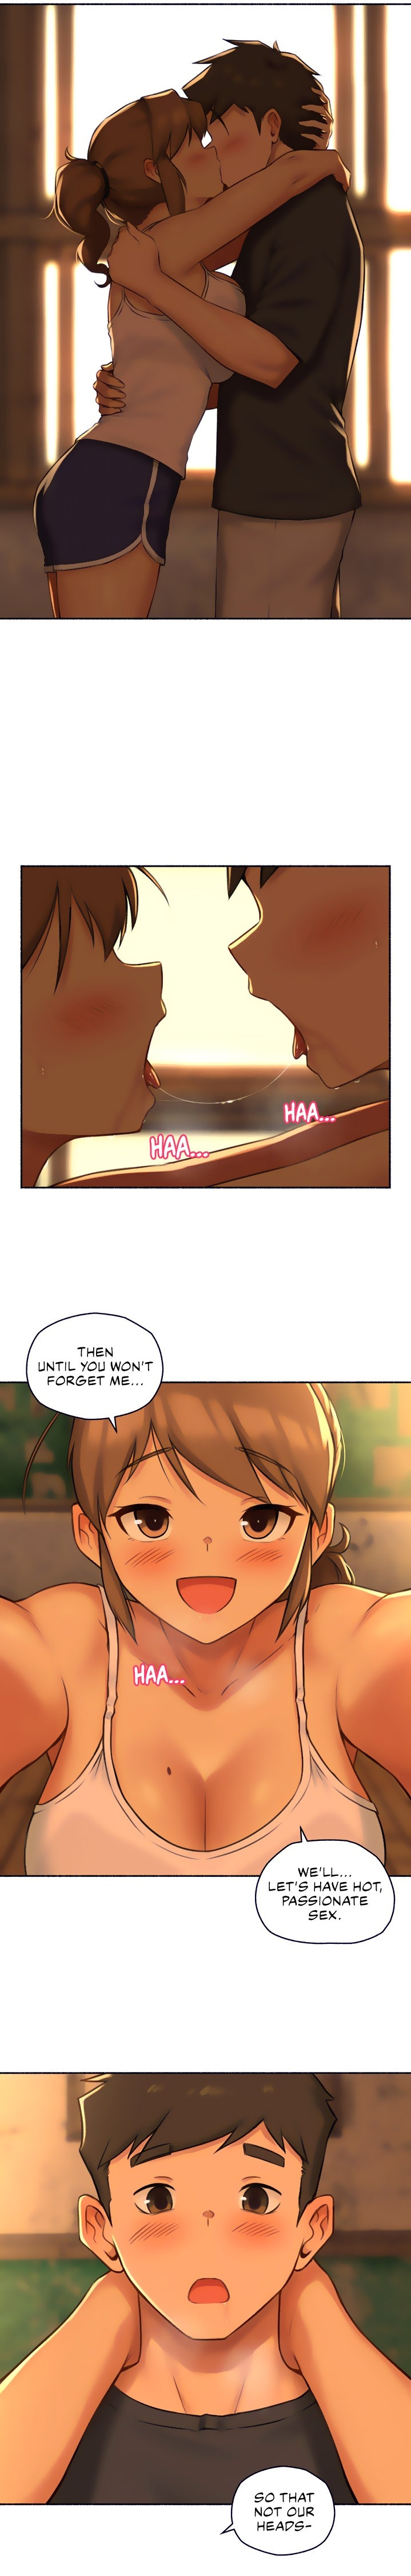 The Memories of that Summer Day - Chapter 10 Page 3